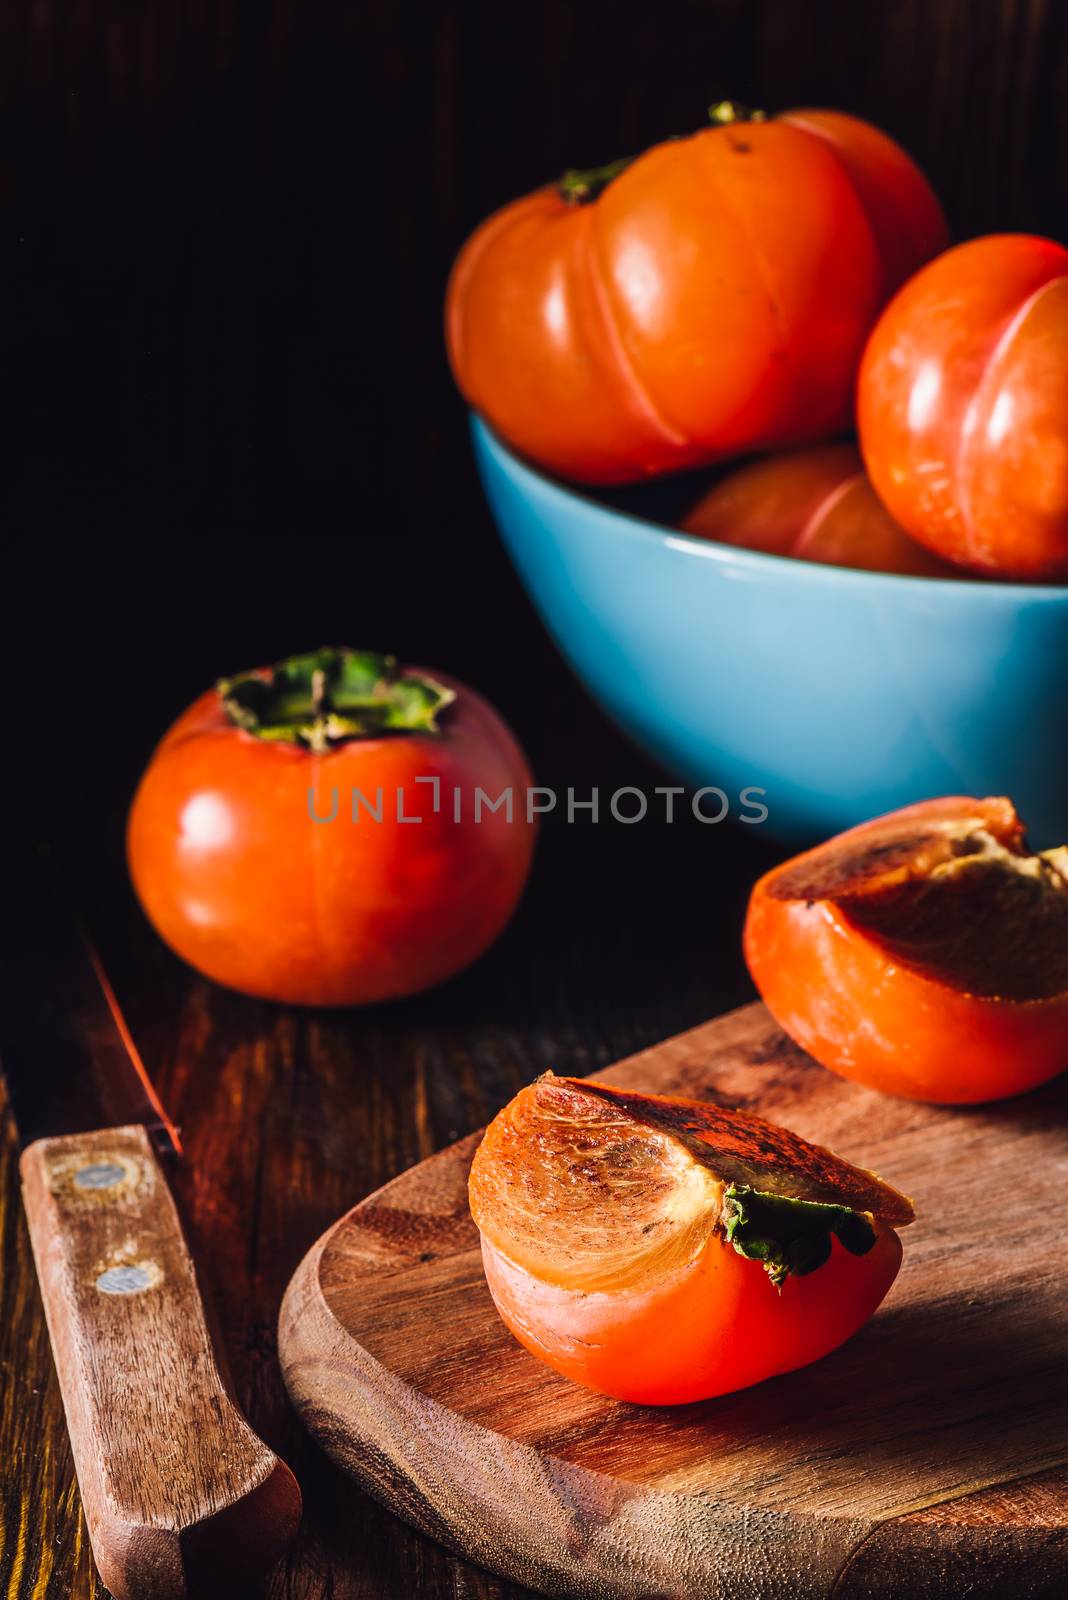 Persimmon Slices with Knife and Some Fruits in Blue Bowl on Background. Vertical.